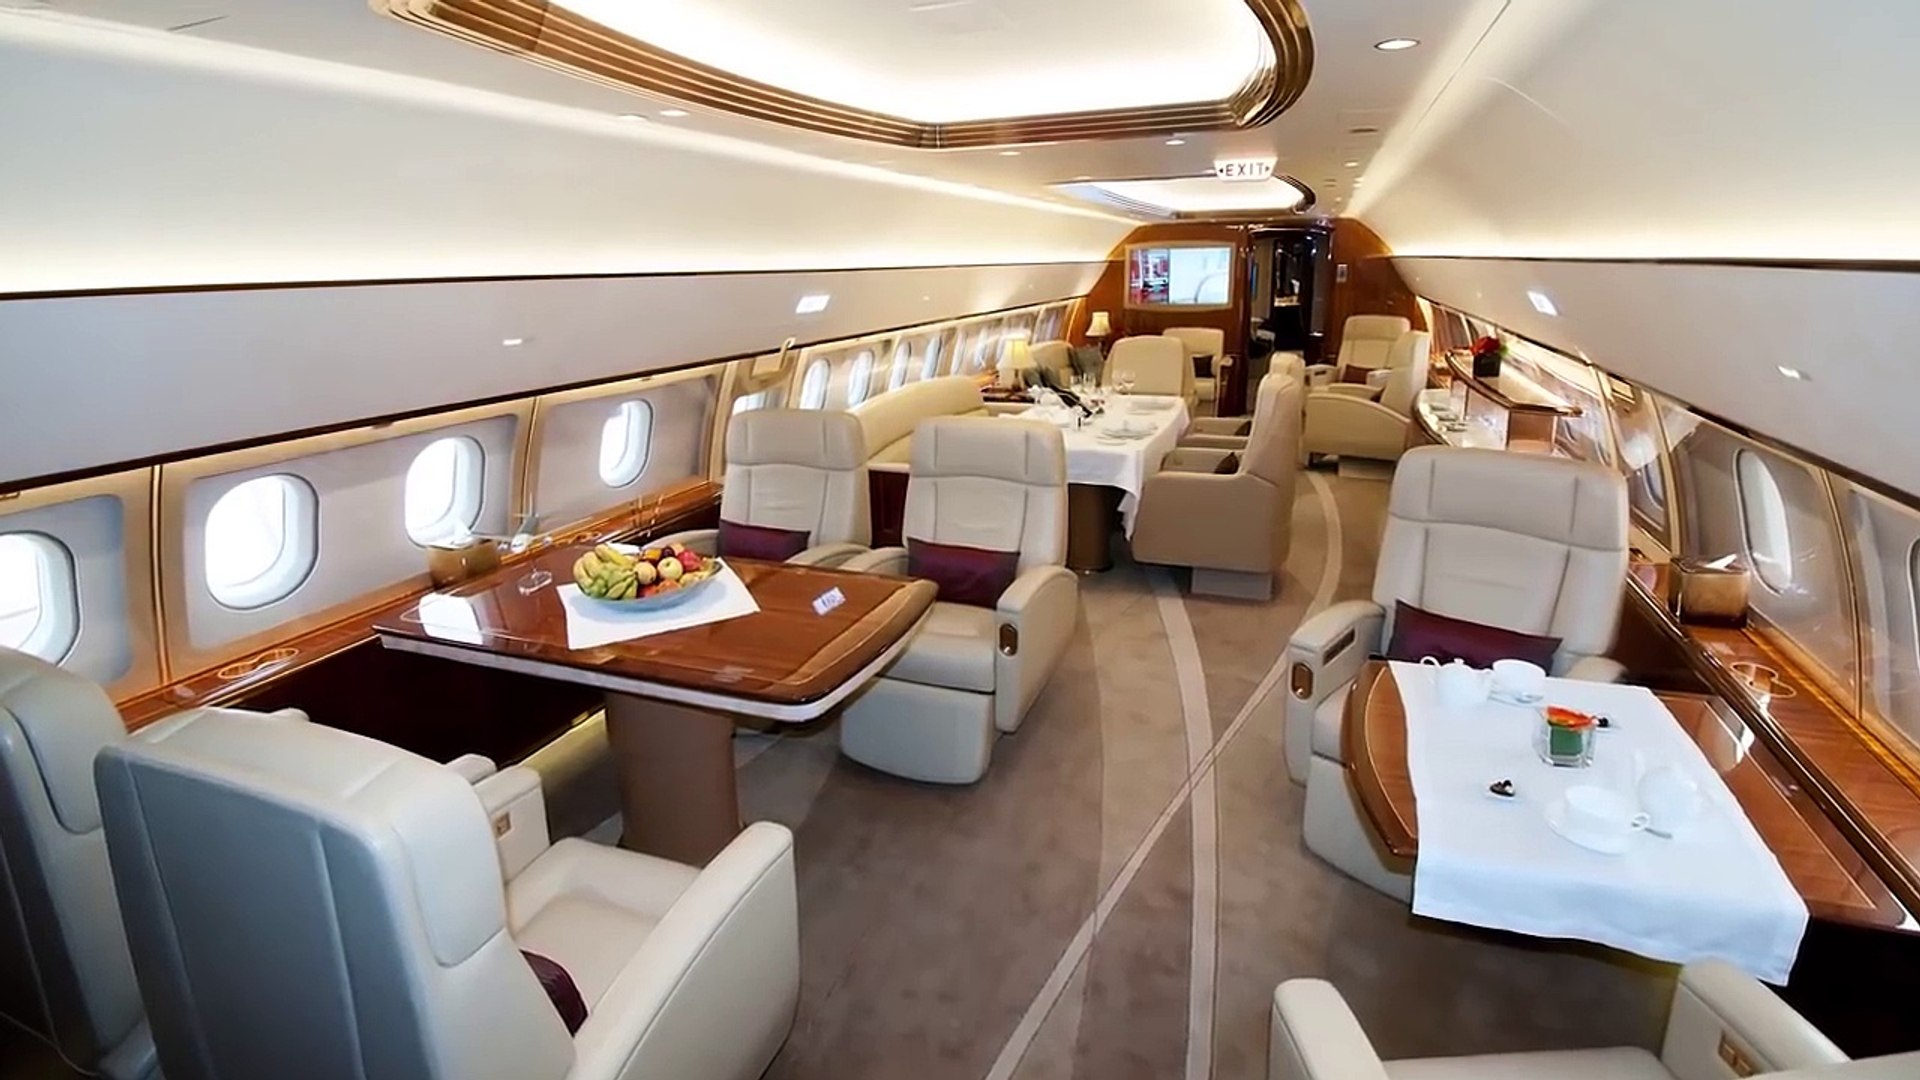 This Is The Vip Boeing 767 Aircraft That President Mugabe Hires For Millions